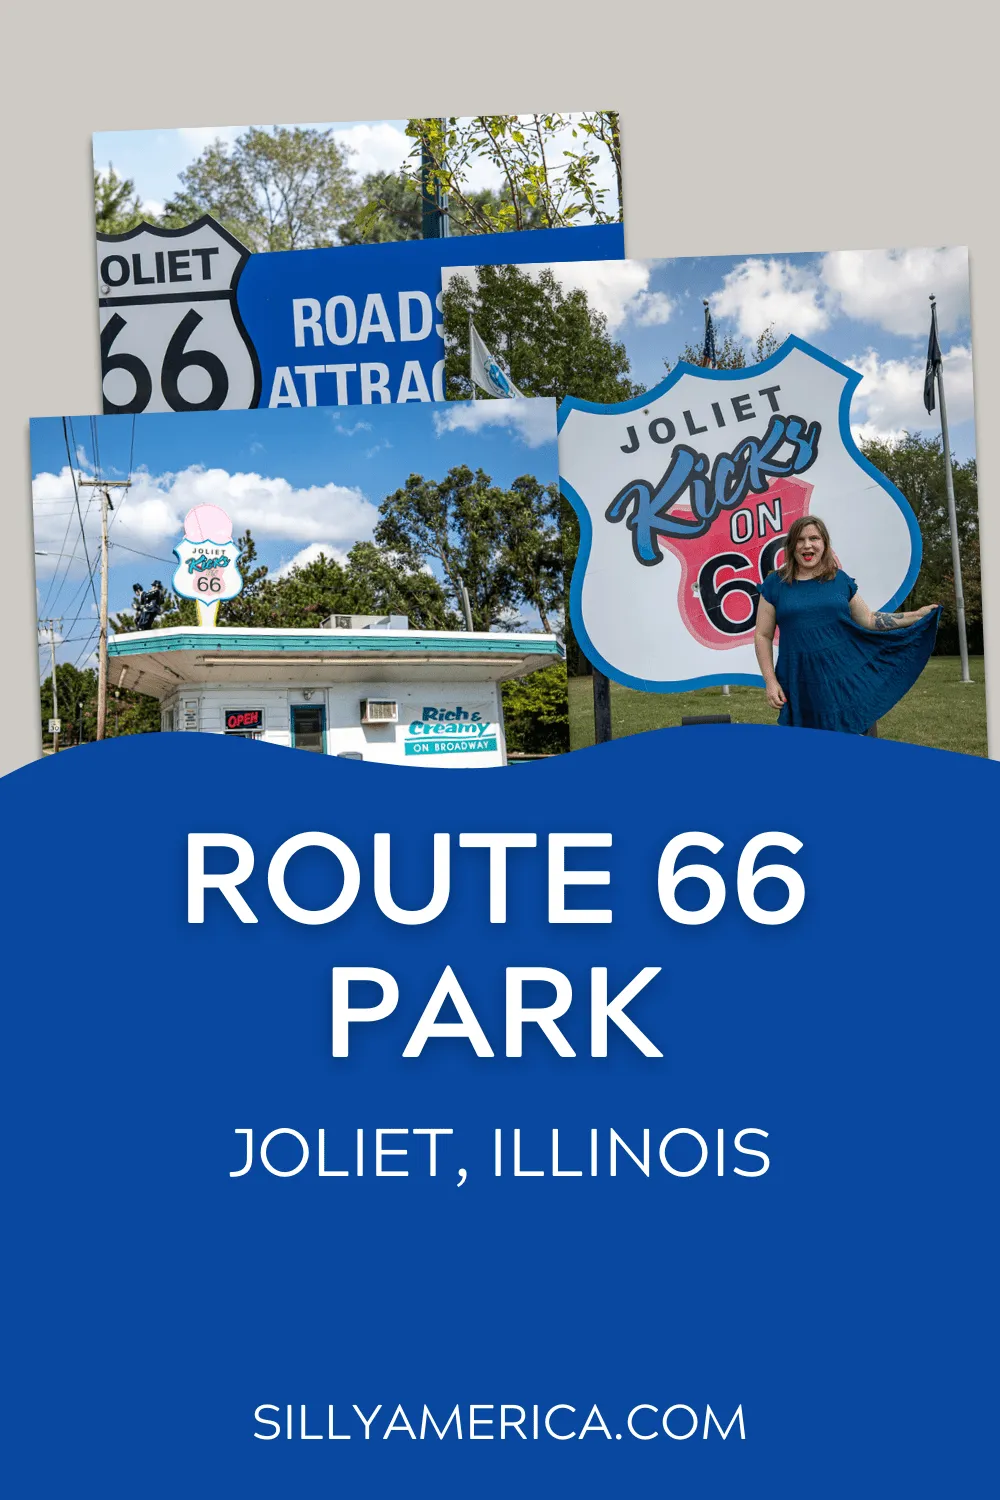 Joliet kicks on 66, and so can you. Stop at Route 66 Park in Joliet, Illinois to stretch your legs, get some ice cream, admire a historic prison, and maybe sing the blues. Stop at Rich & Creamy Ice Cream, see the Blues Brothers and Joliet Prison, and take selfies at the Joliet Kicks on 66 sign.  #RoadTrips #RoadTripStop #Route66 #Route66RoadTrip #IllinoisRoute66 #Illinois #IllinoisRoadTrip #IllinoisRoadsideAttractions #RoadsideAttractions #RoadsideAttraction #RoadsideAmerica #RoadTrip